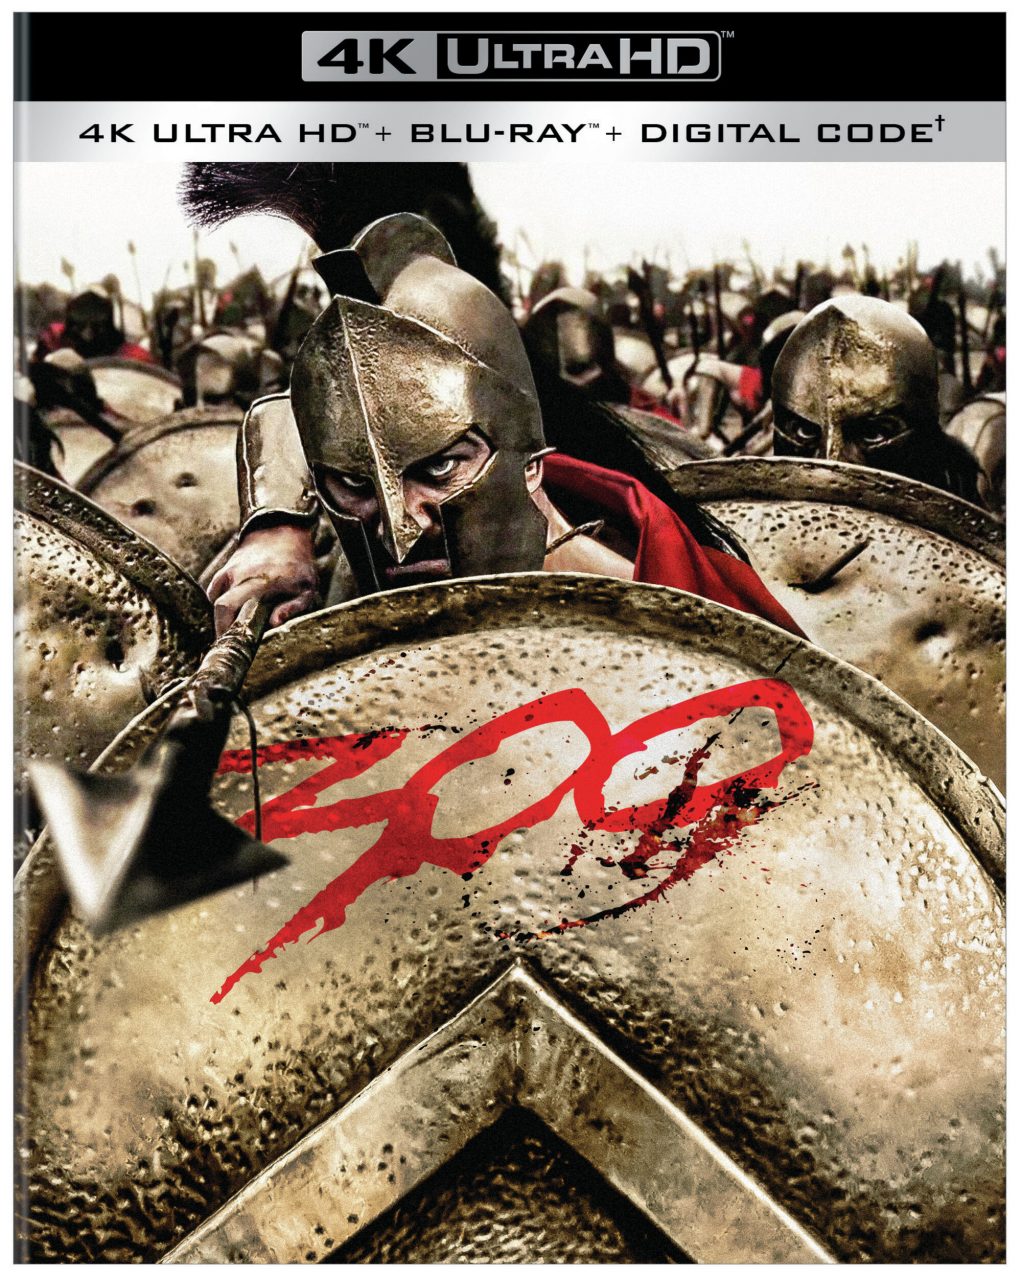 300 4K Ultra HD Combo Pack cover (Warner Bros. Home Entertainment)